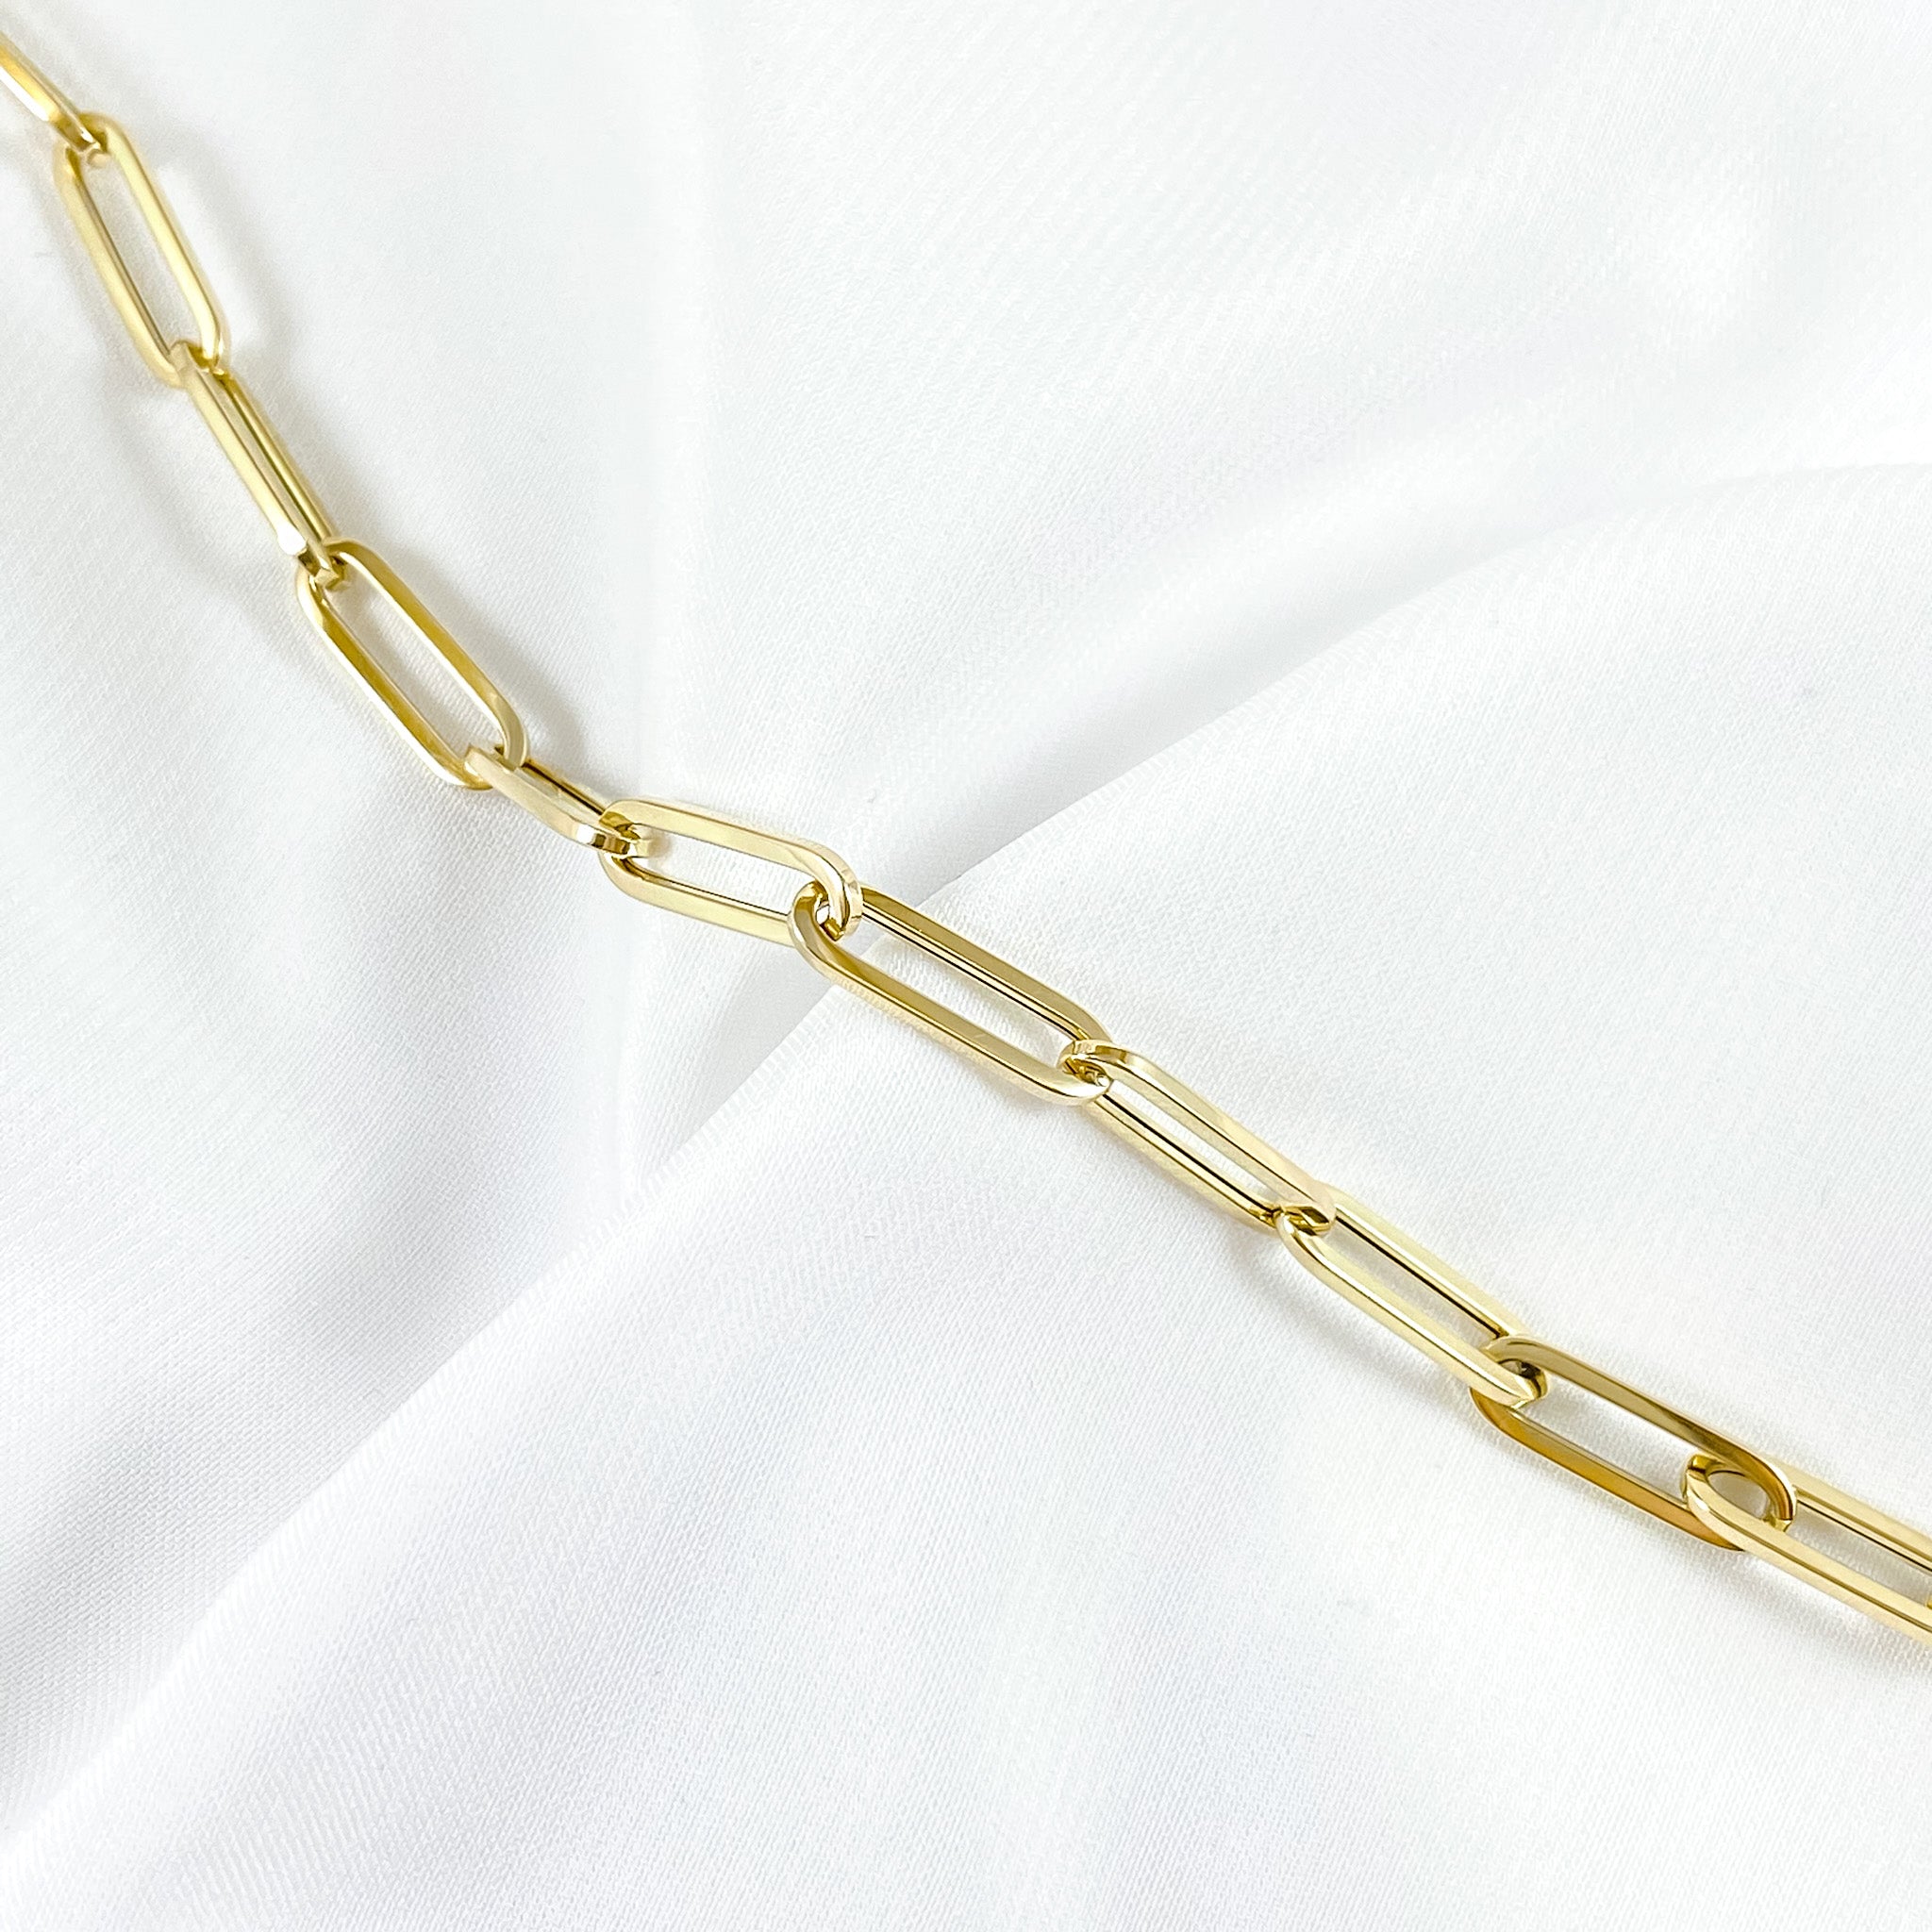 Angular Paperclip Necklace with Springlock